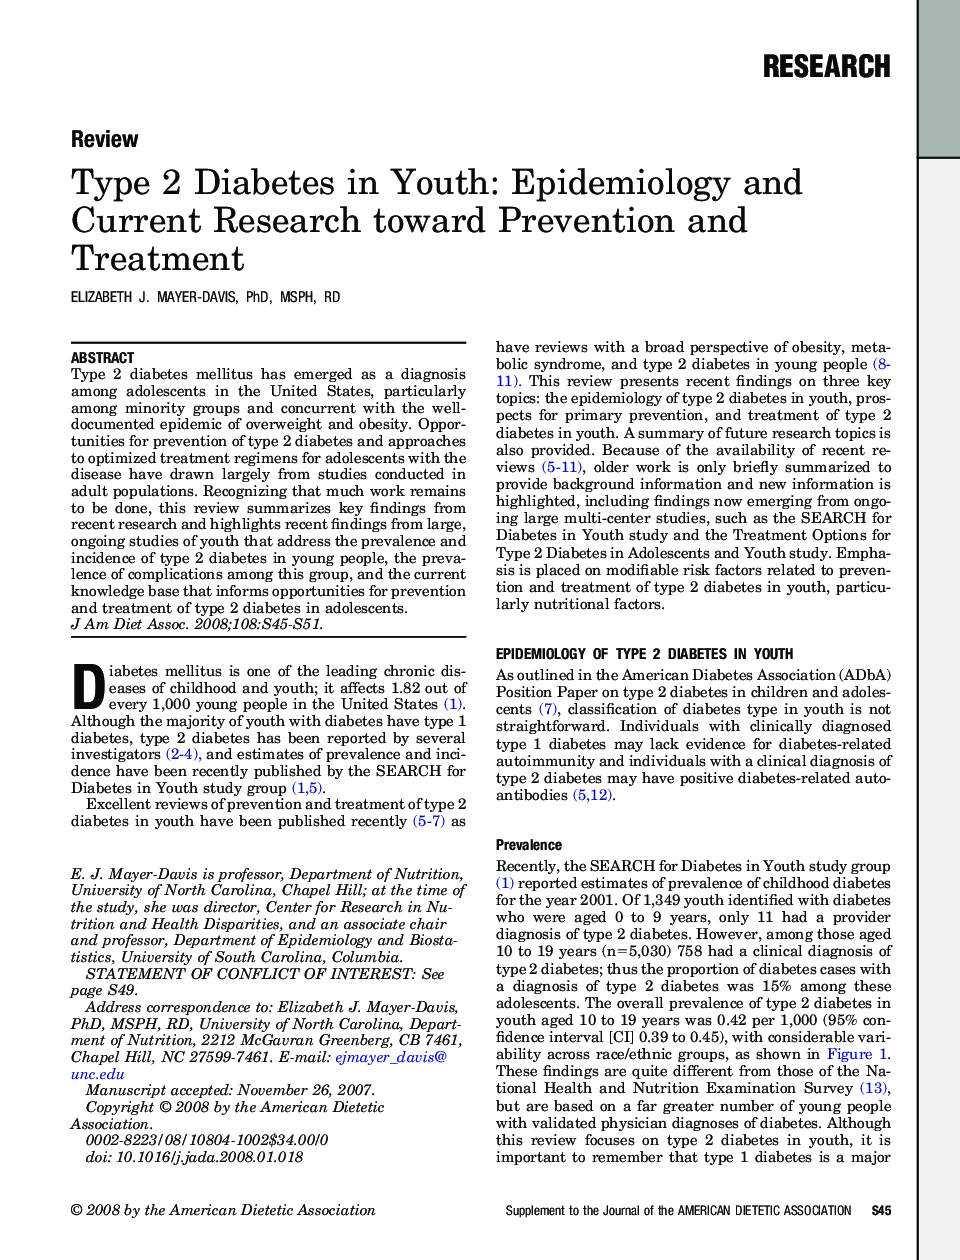 Type 2 Diabetes in Youth: Epidemiology and Current Research toward Prevention and Treatment 